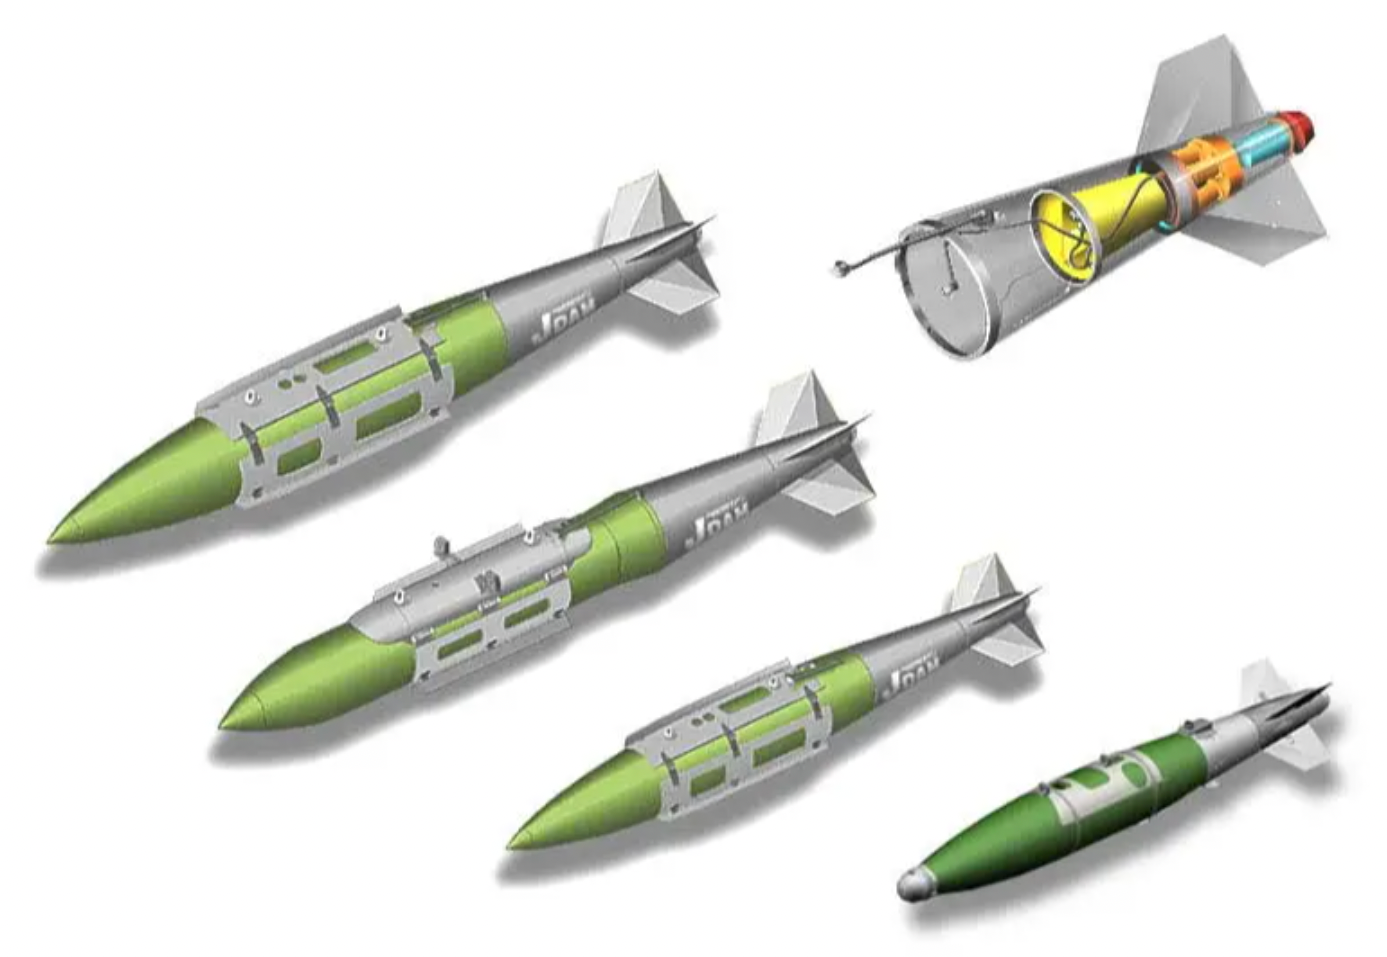 A graphic showing the basic (non-wing-kit) JDAM kits fitted to unguided general-purpose bombs. From top to bottom: 2,000-pound Mk 84, 2,000-pound BLU-109 penetrator warhead, 1,000-pound Mk 83/BLU-110, 500-pound Mk 82/BLU-111. On the right is the guidance and control section, mounted in the tail of the bomb body.&nbsp;<em>U.S. Air Force</em>